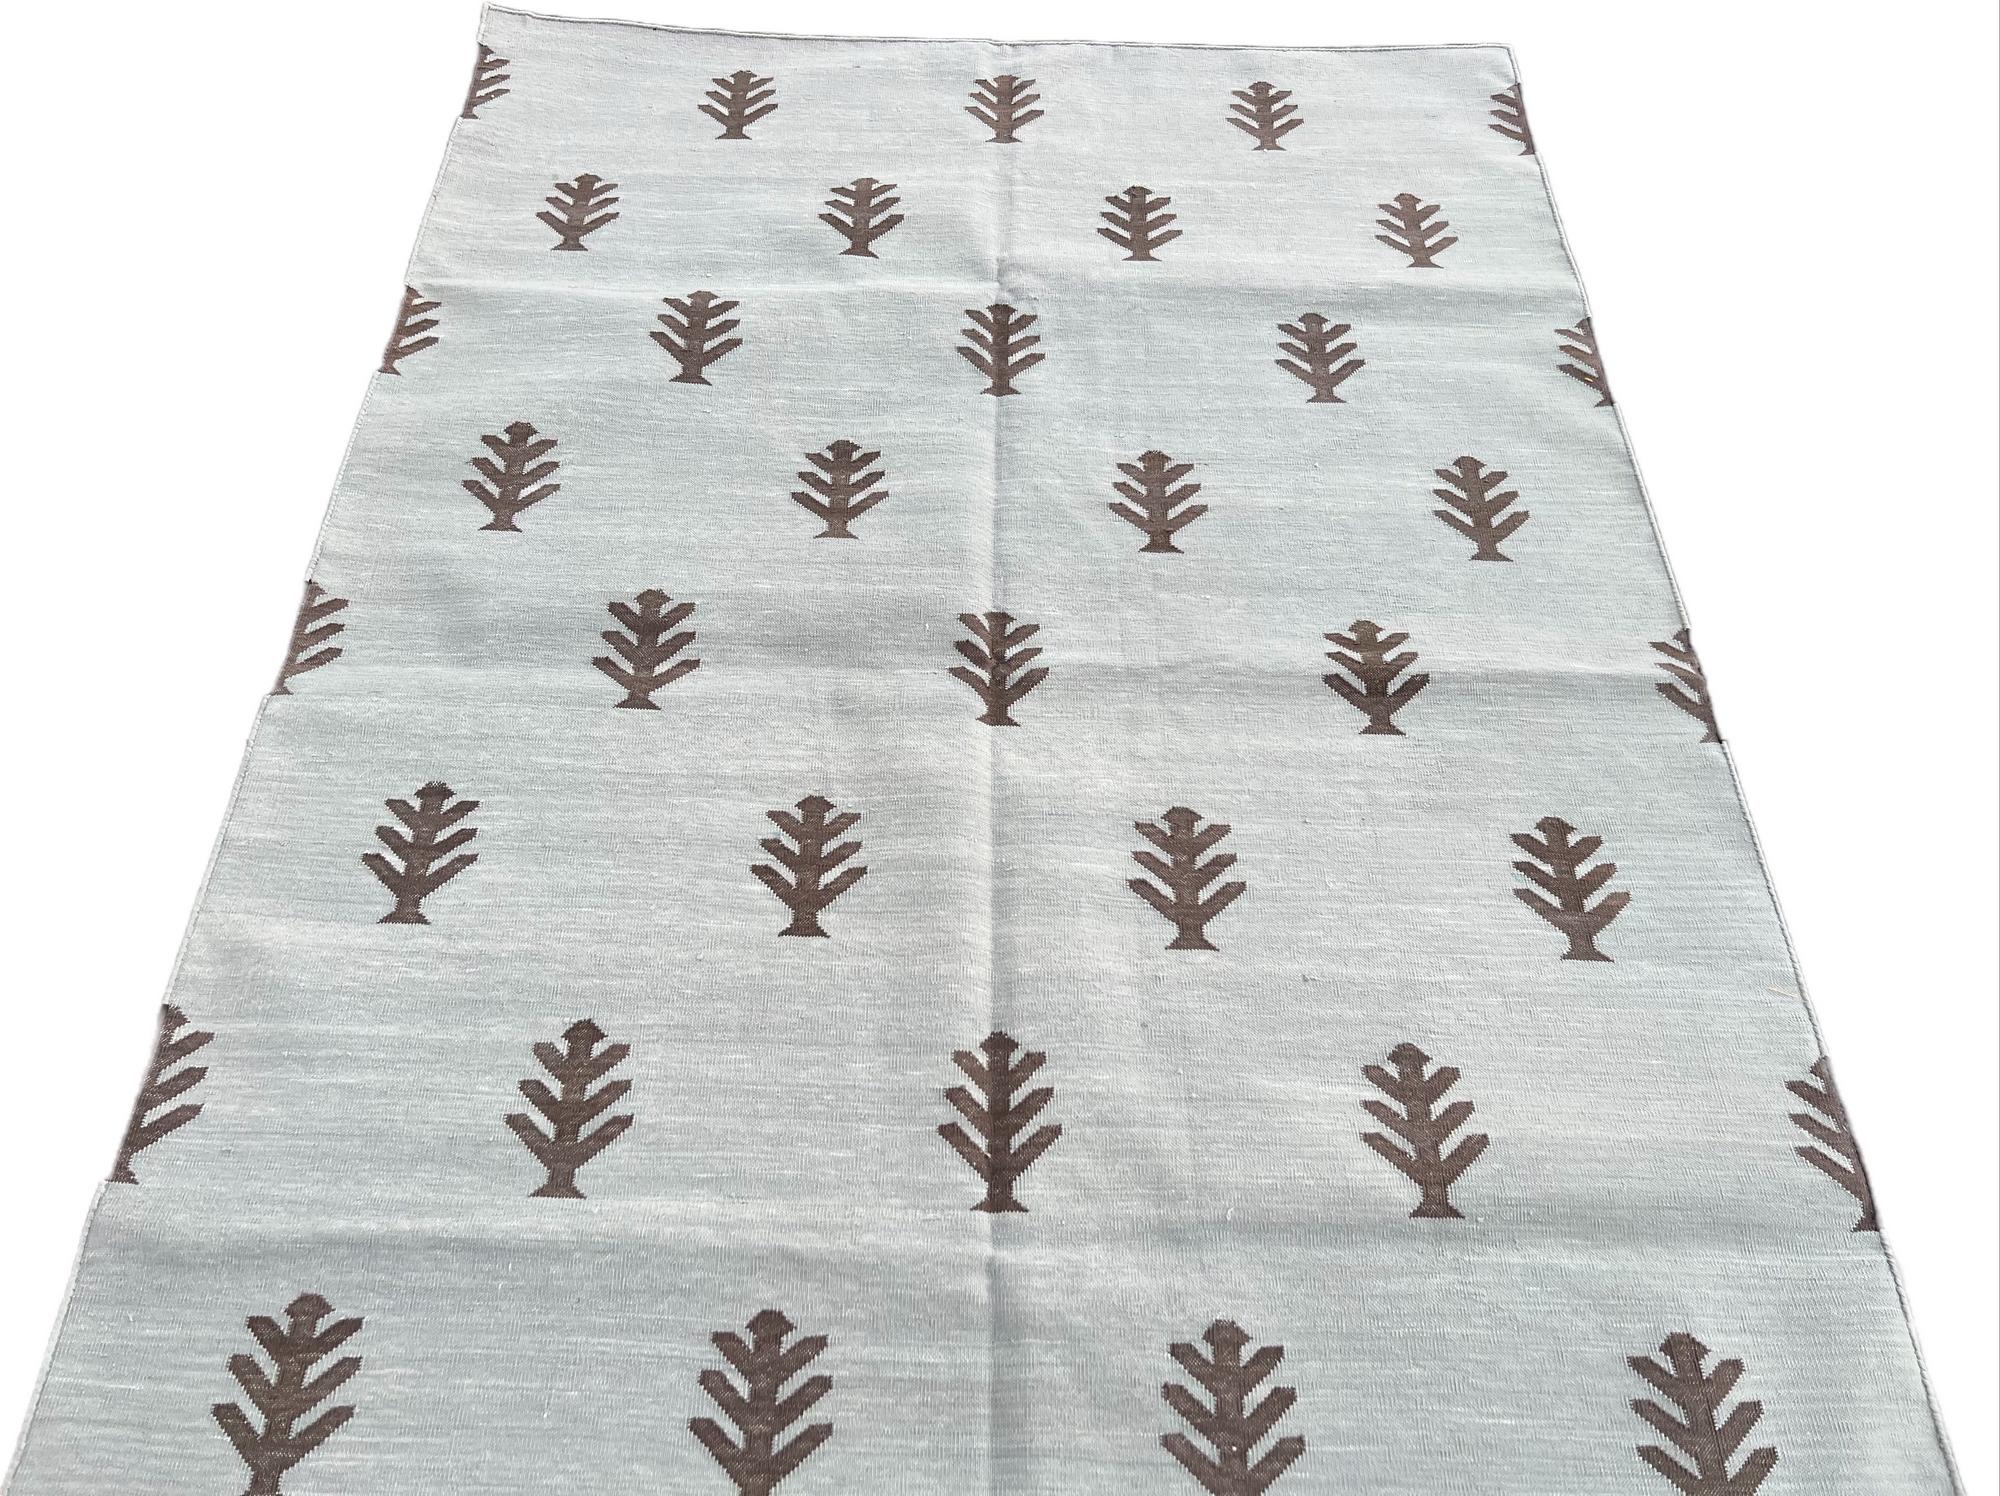 Contemporary Handmade Cotton Area Flat Weave Rug, Grey & Brown Tree Patterned Indian Dhurrie For Sale